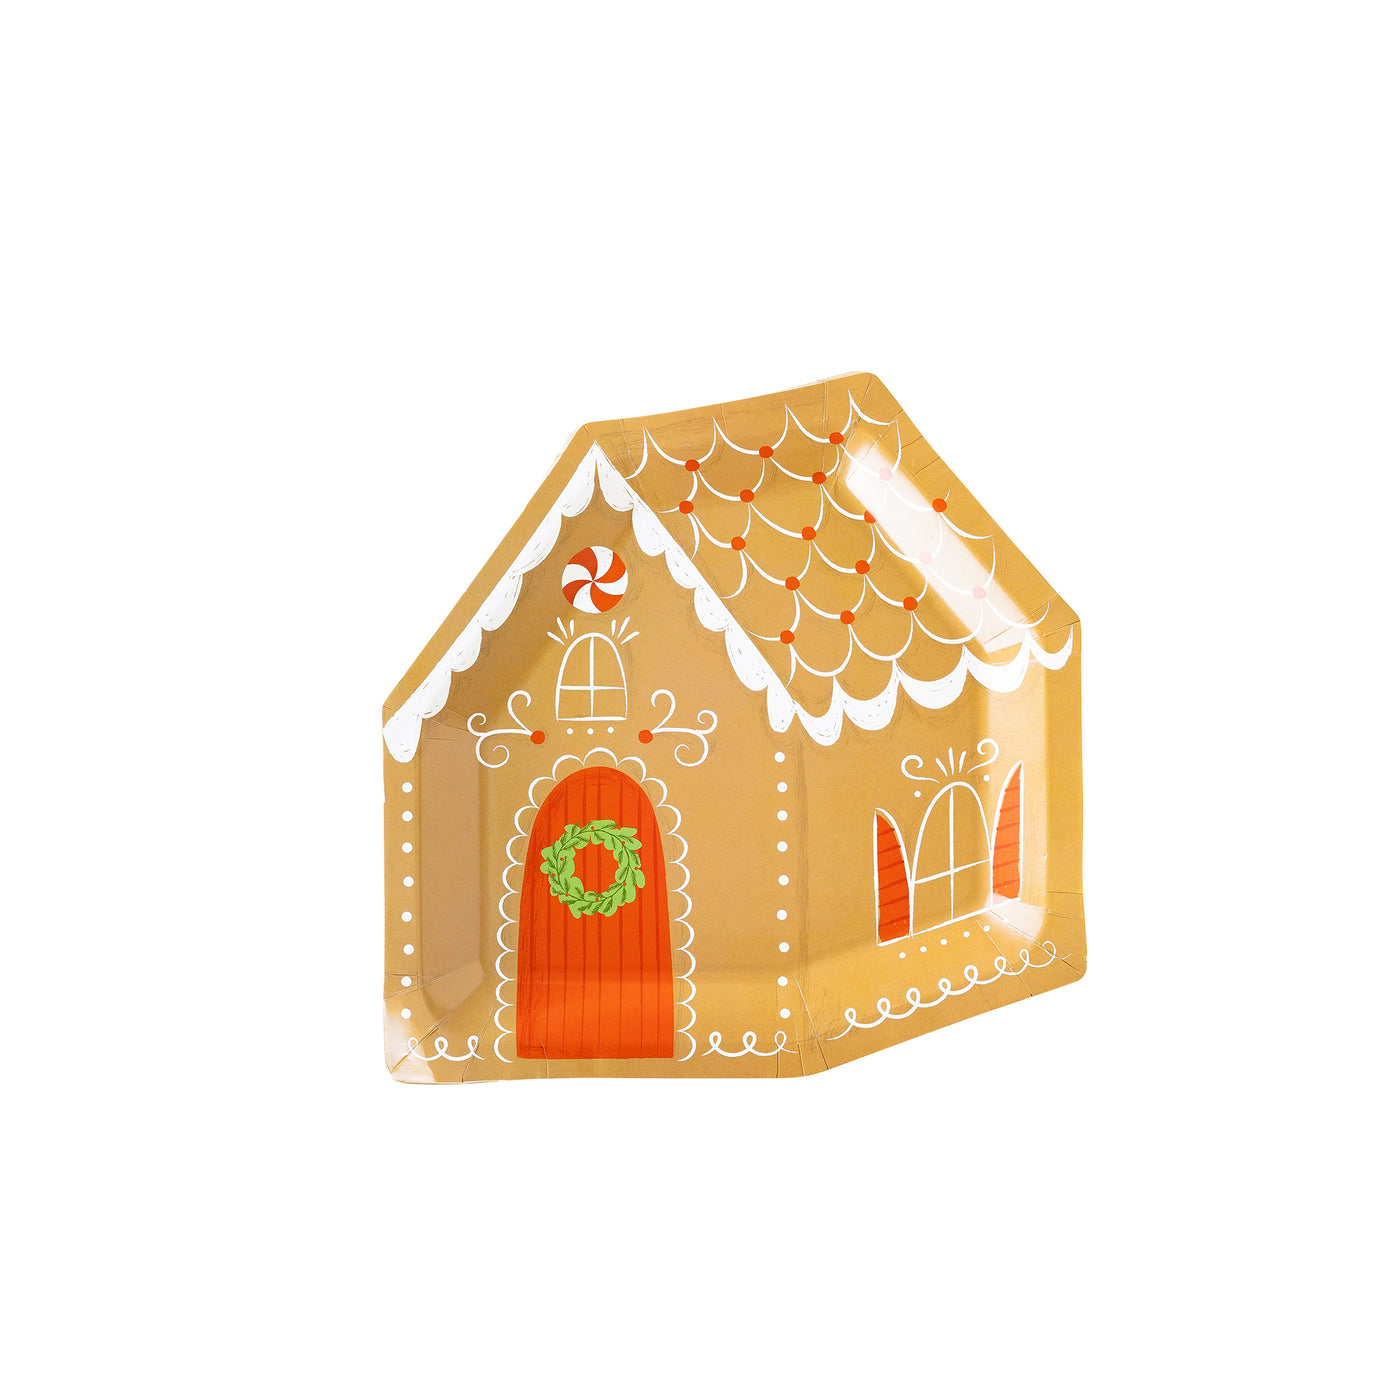 PLTS384C - Gingerbread House Shaped Paper Plate